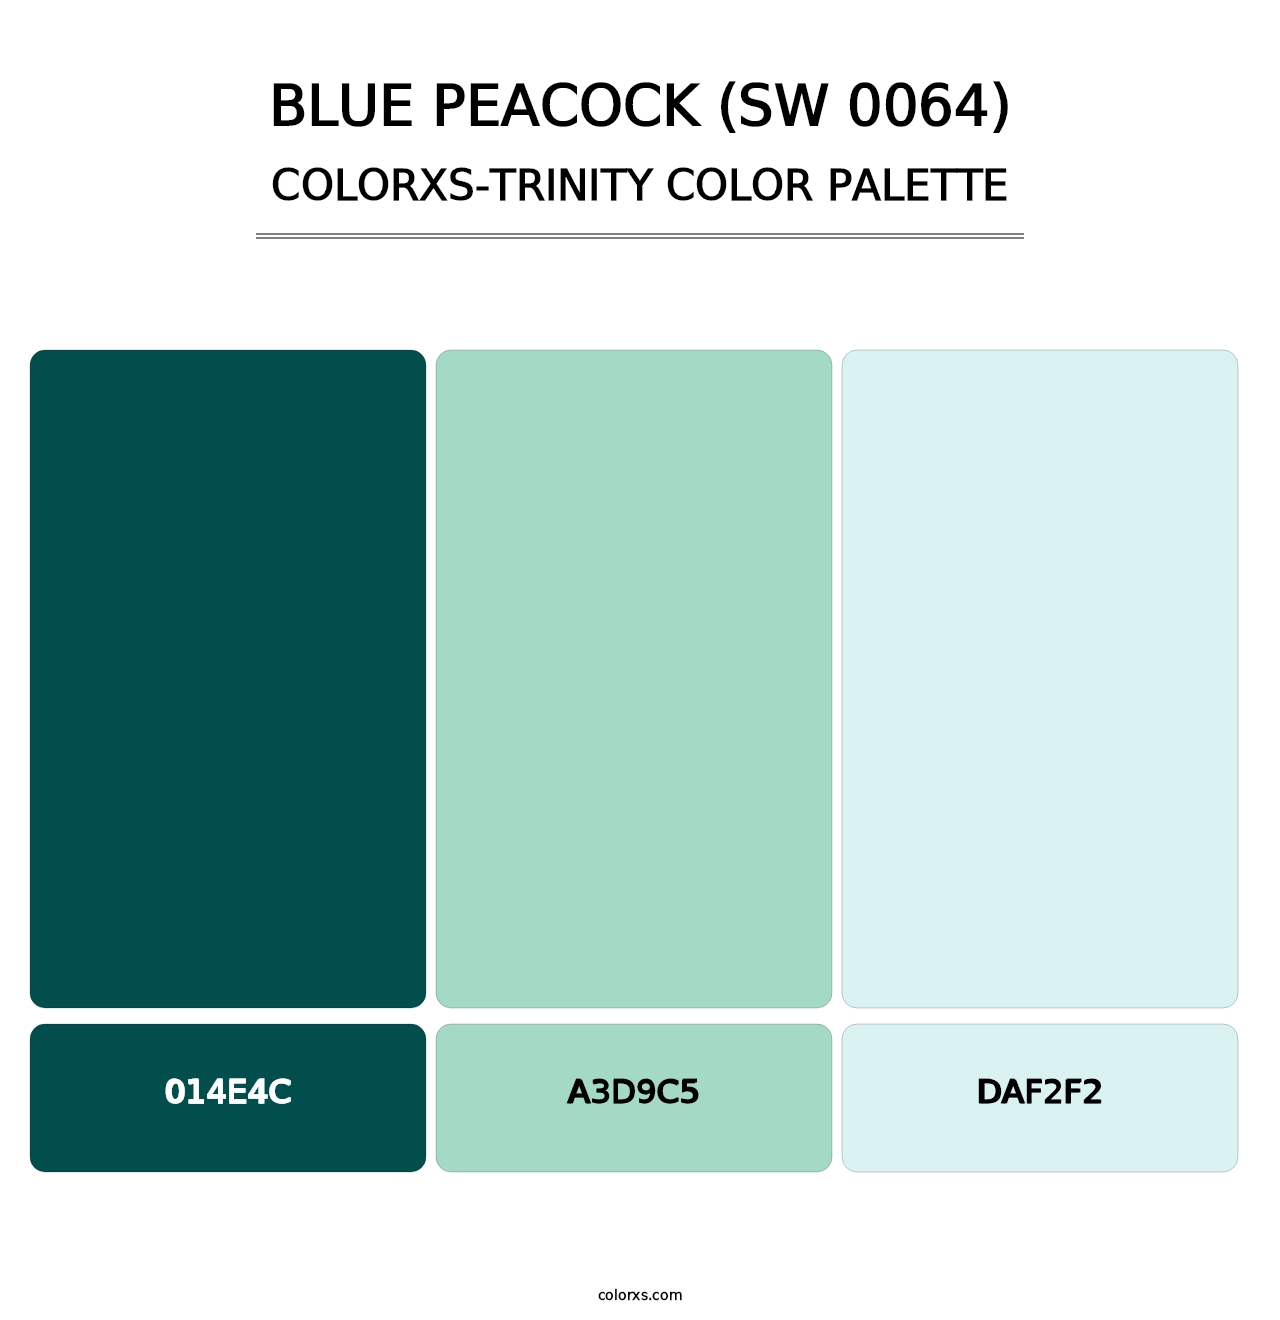 Blue Peacock (SW 0064) - Colorxs Trinity Palette